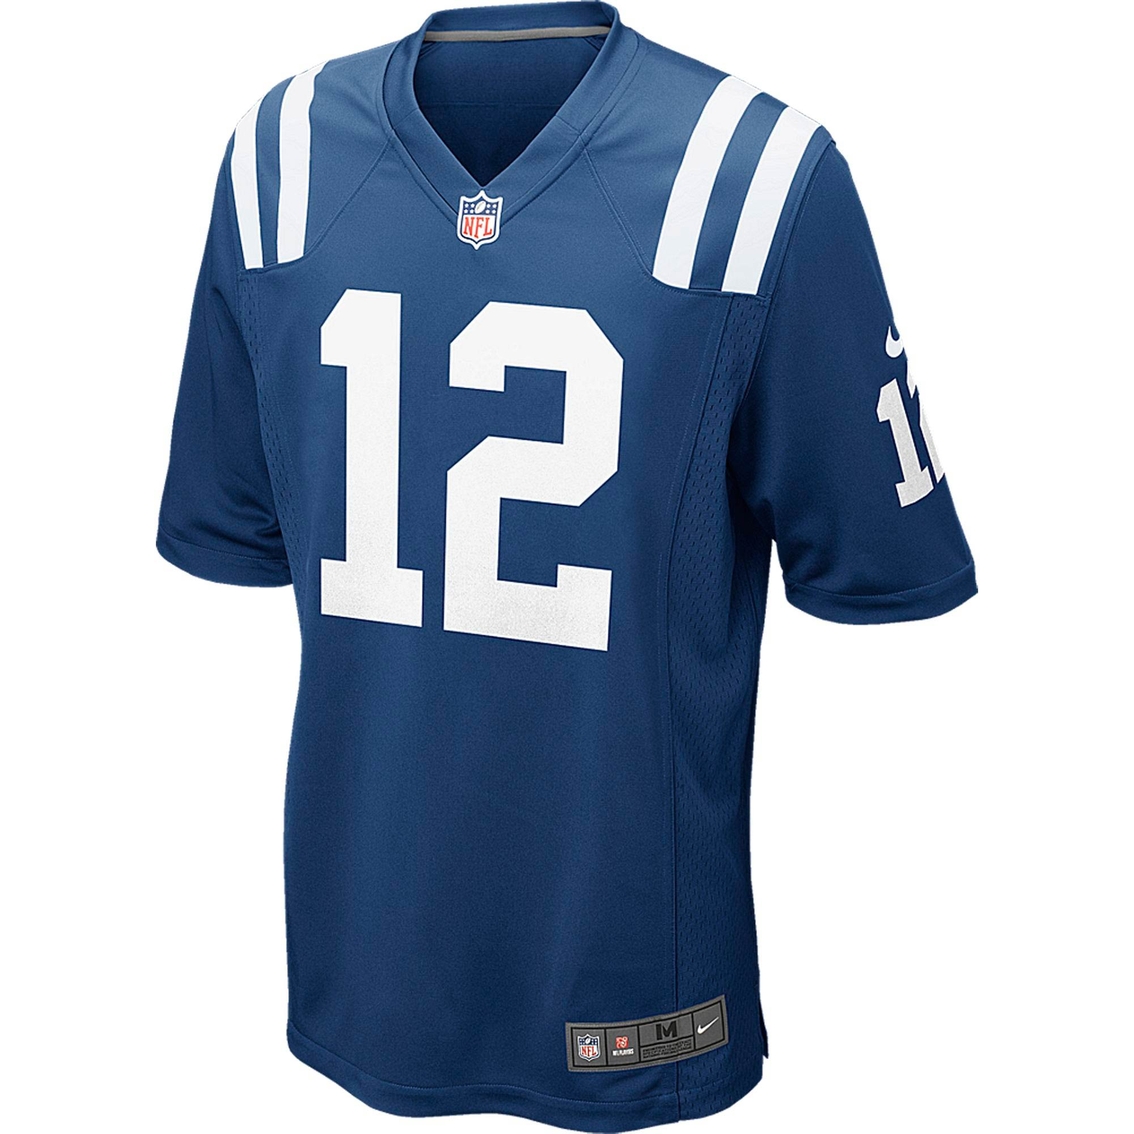 nike andrew luck jersey